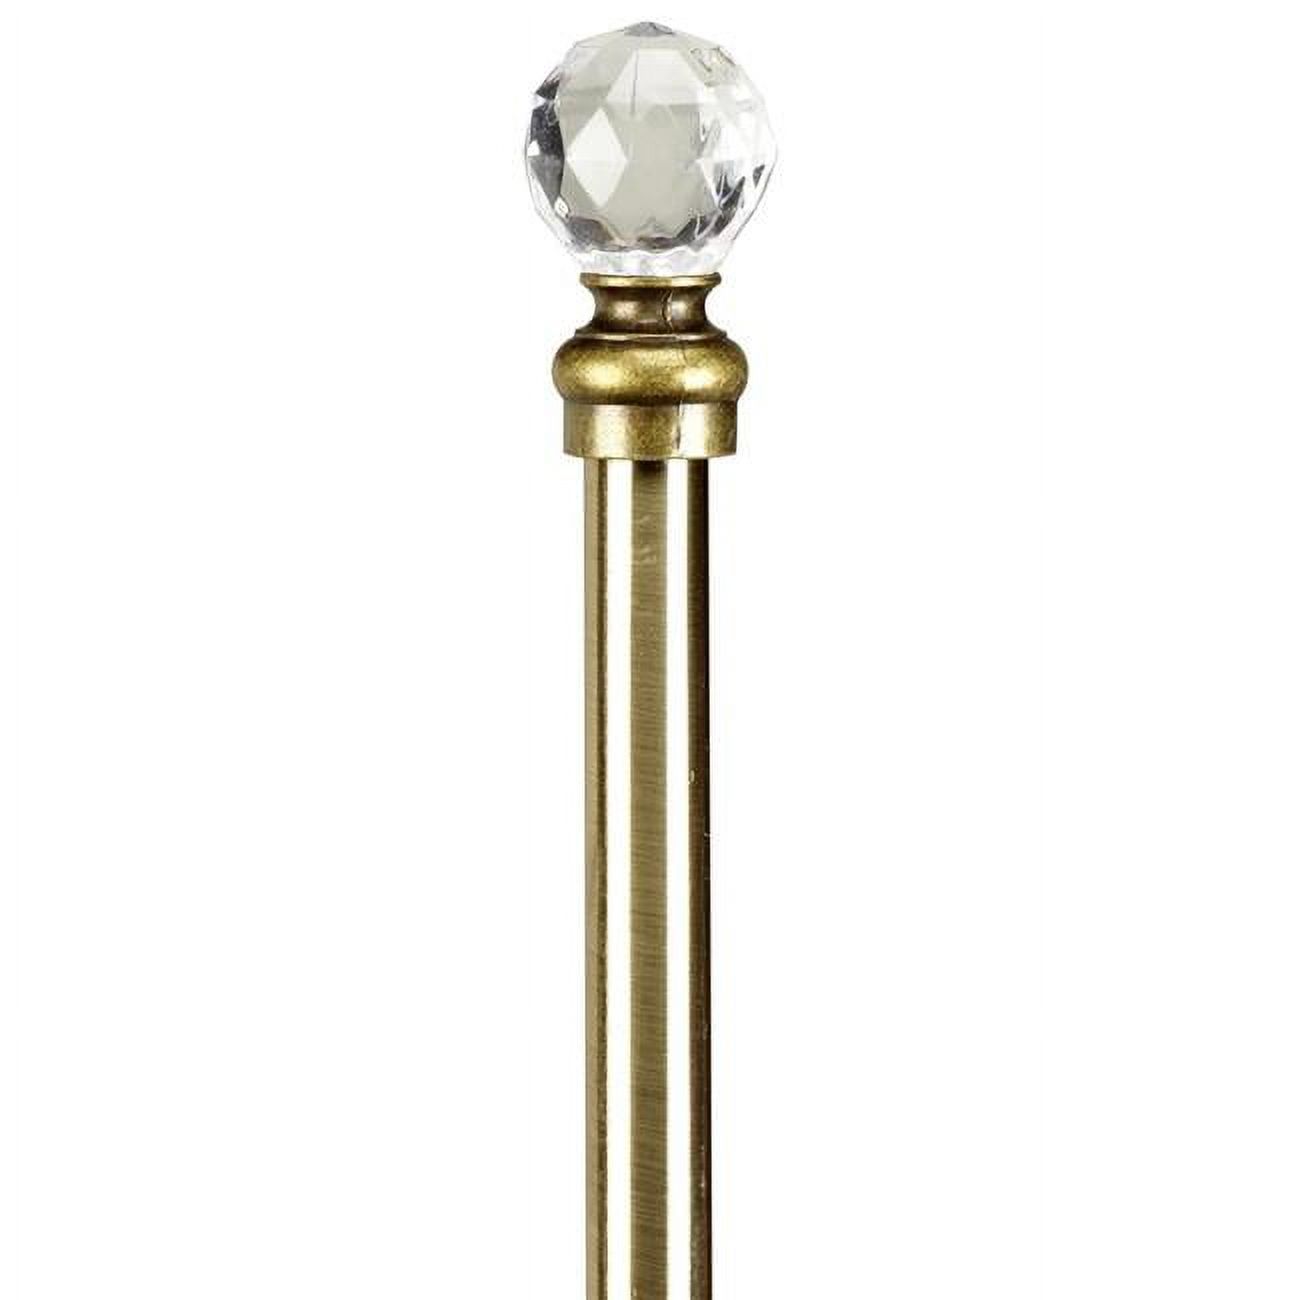 Home Details Crystal Ball Expandable Curtain Rod 24"- 48", Antique Brass - image 1 of 2